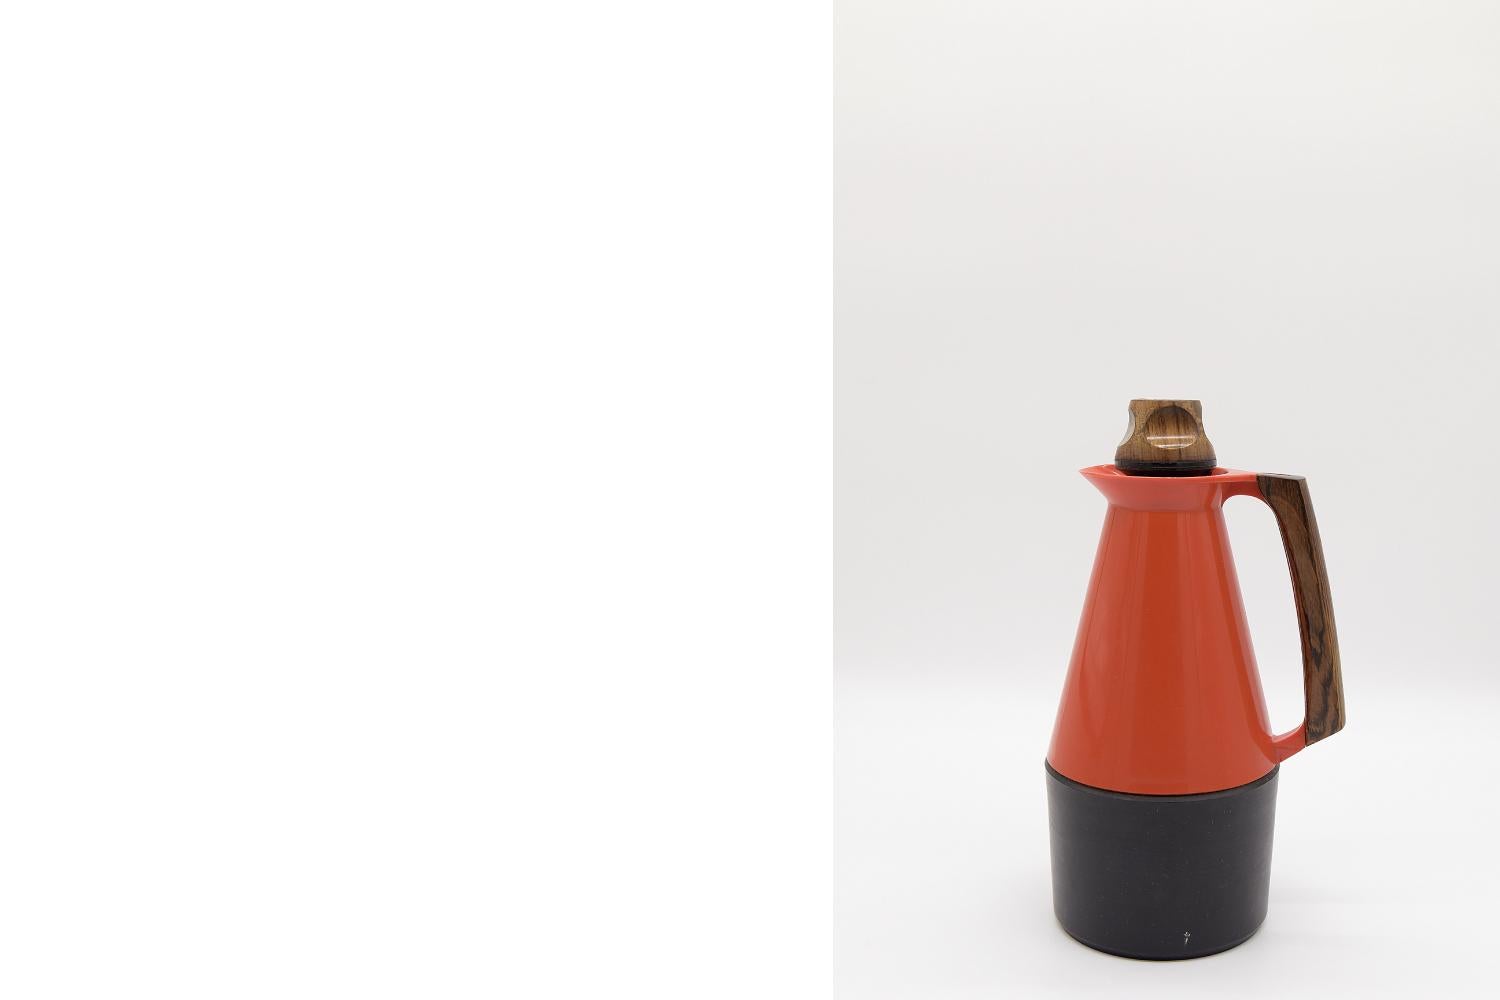 This TV-Kanna Signatur thermos was designed in 1962 by Carl-Arne Breger for the Swedish manufacturer Husqvarna Borstfabrik. A thermos is made of orange-red plastic with a black bottom. The handle and lid are made of solid teak. The inlet is designed